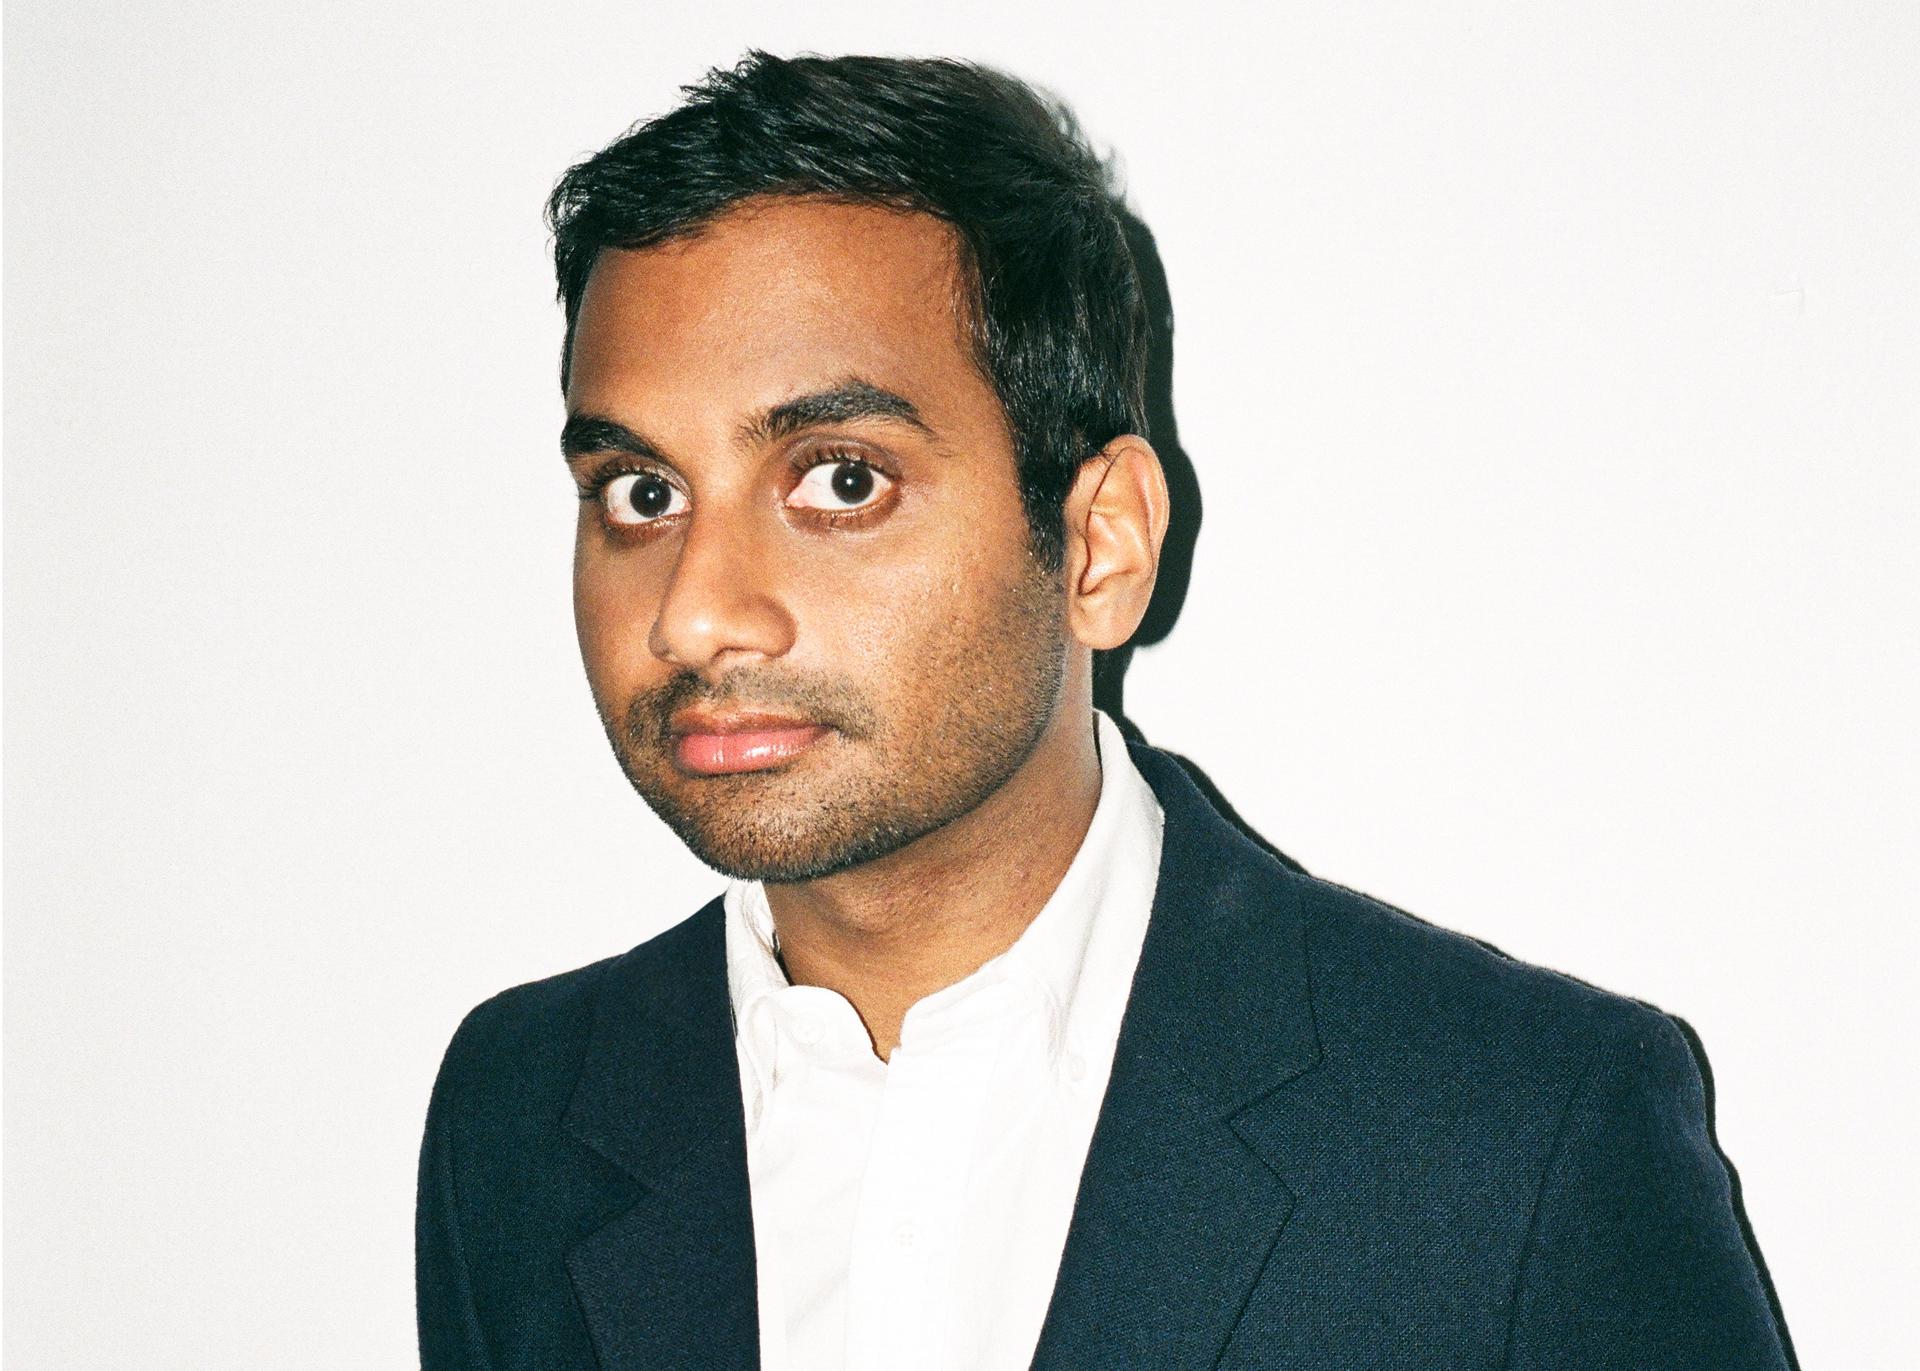 Aziz Ansari, the comedian and actor teamed up with a sociologist from New York University, Eric Klinenberg to take the pulse of global romance in the early 21st century.